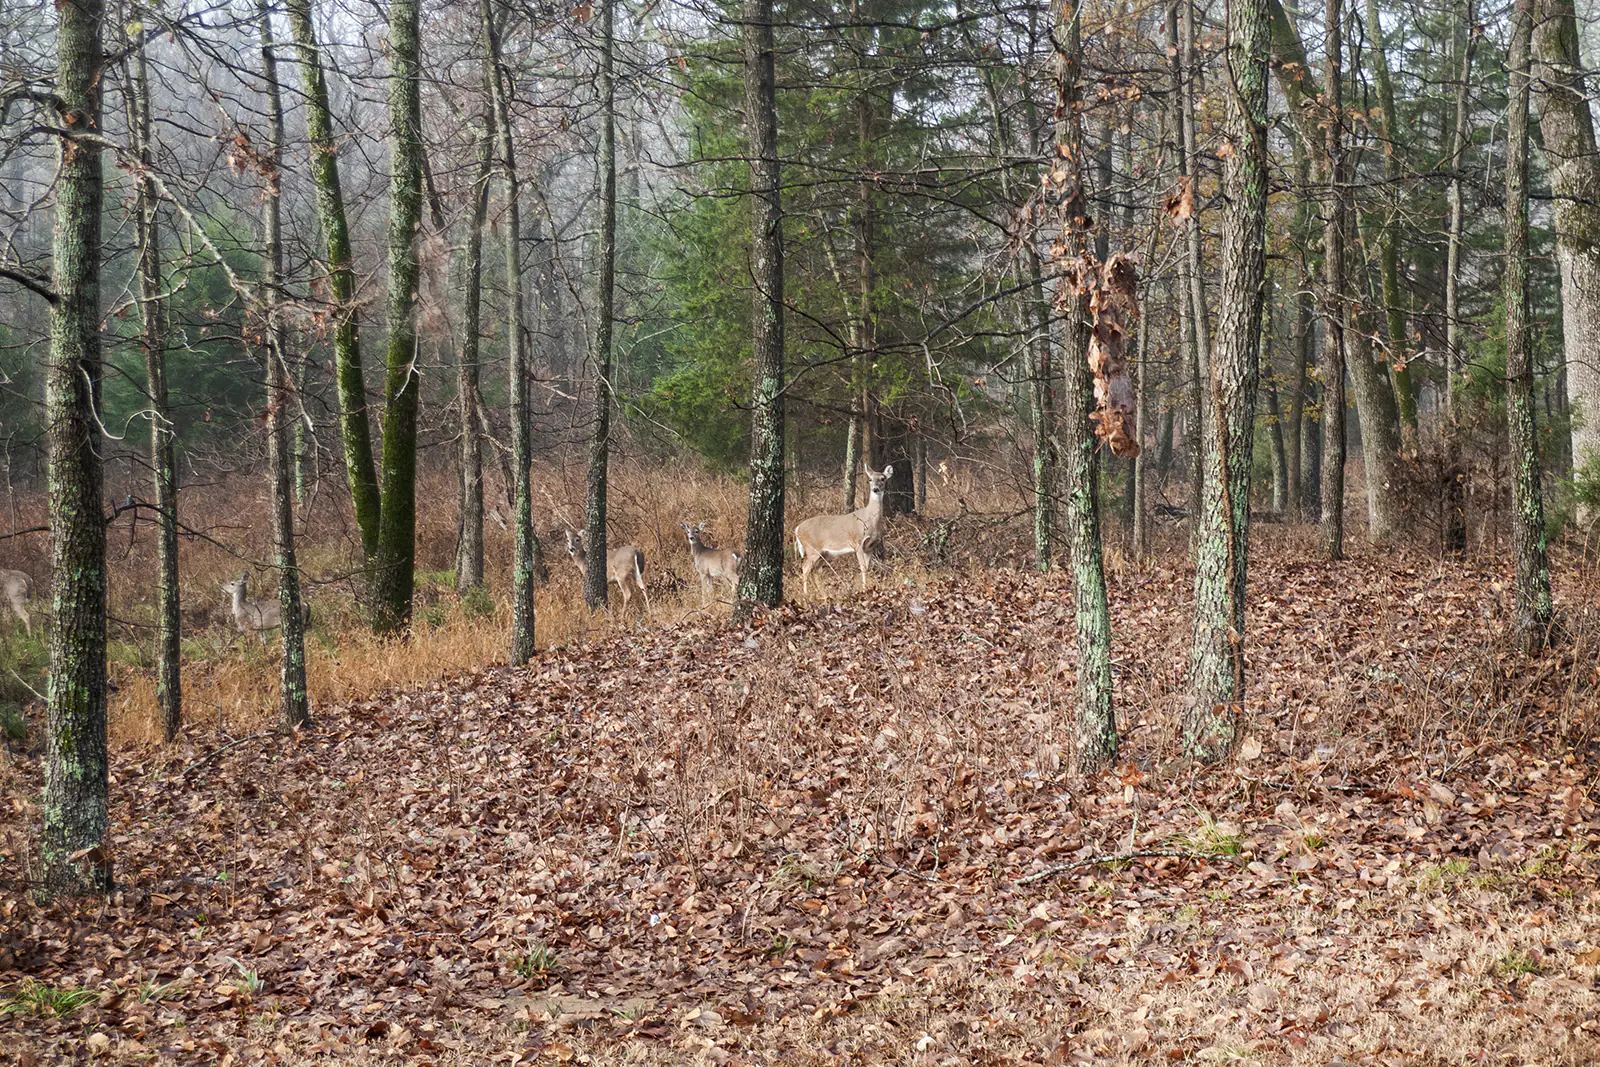 Lanscape of a herd of deer standing in a forest in North Carolina.